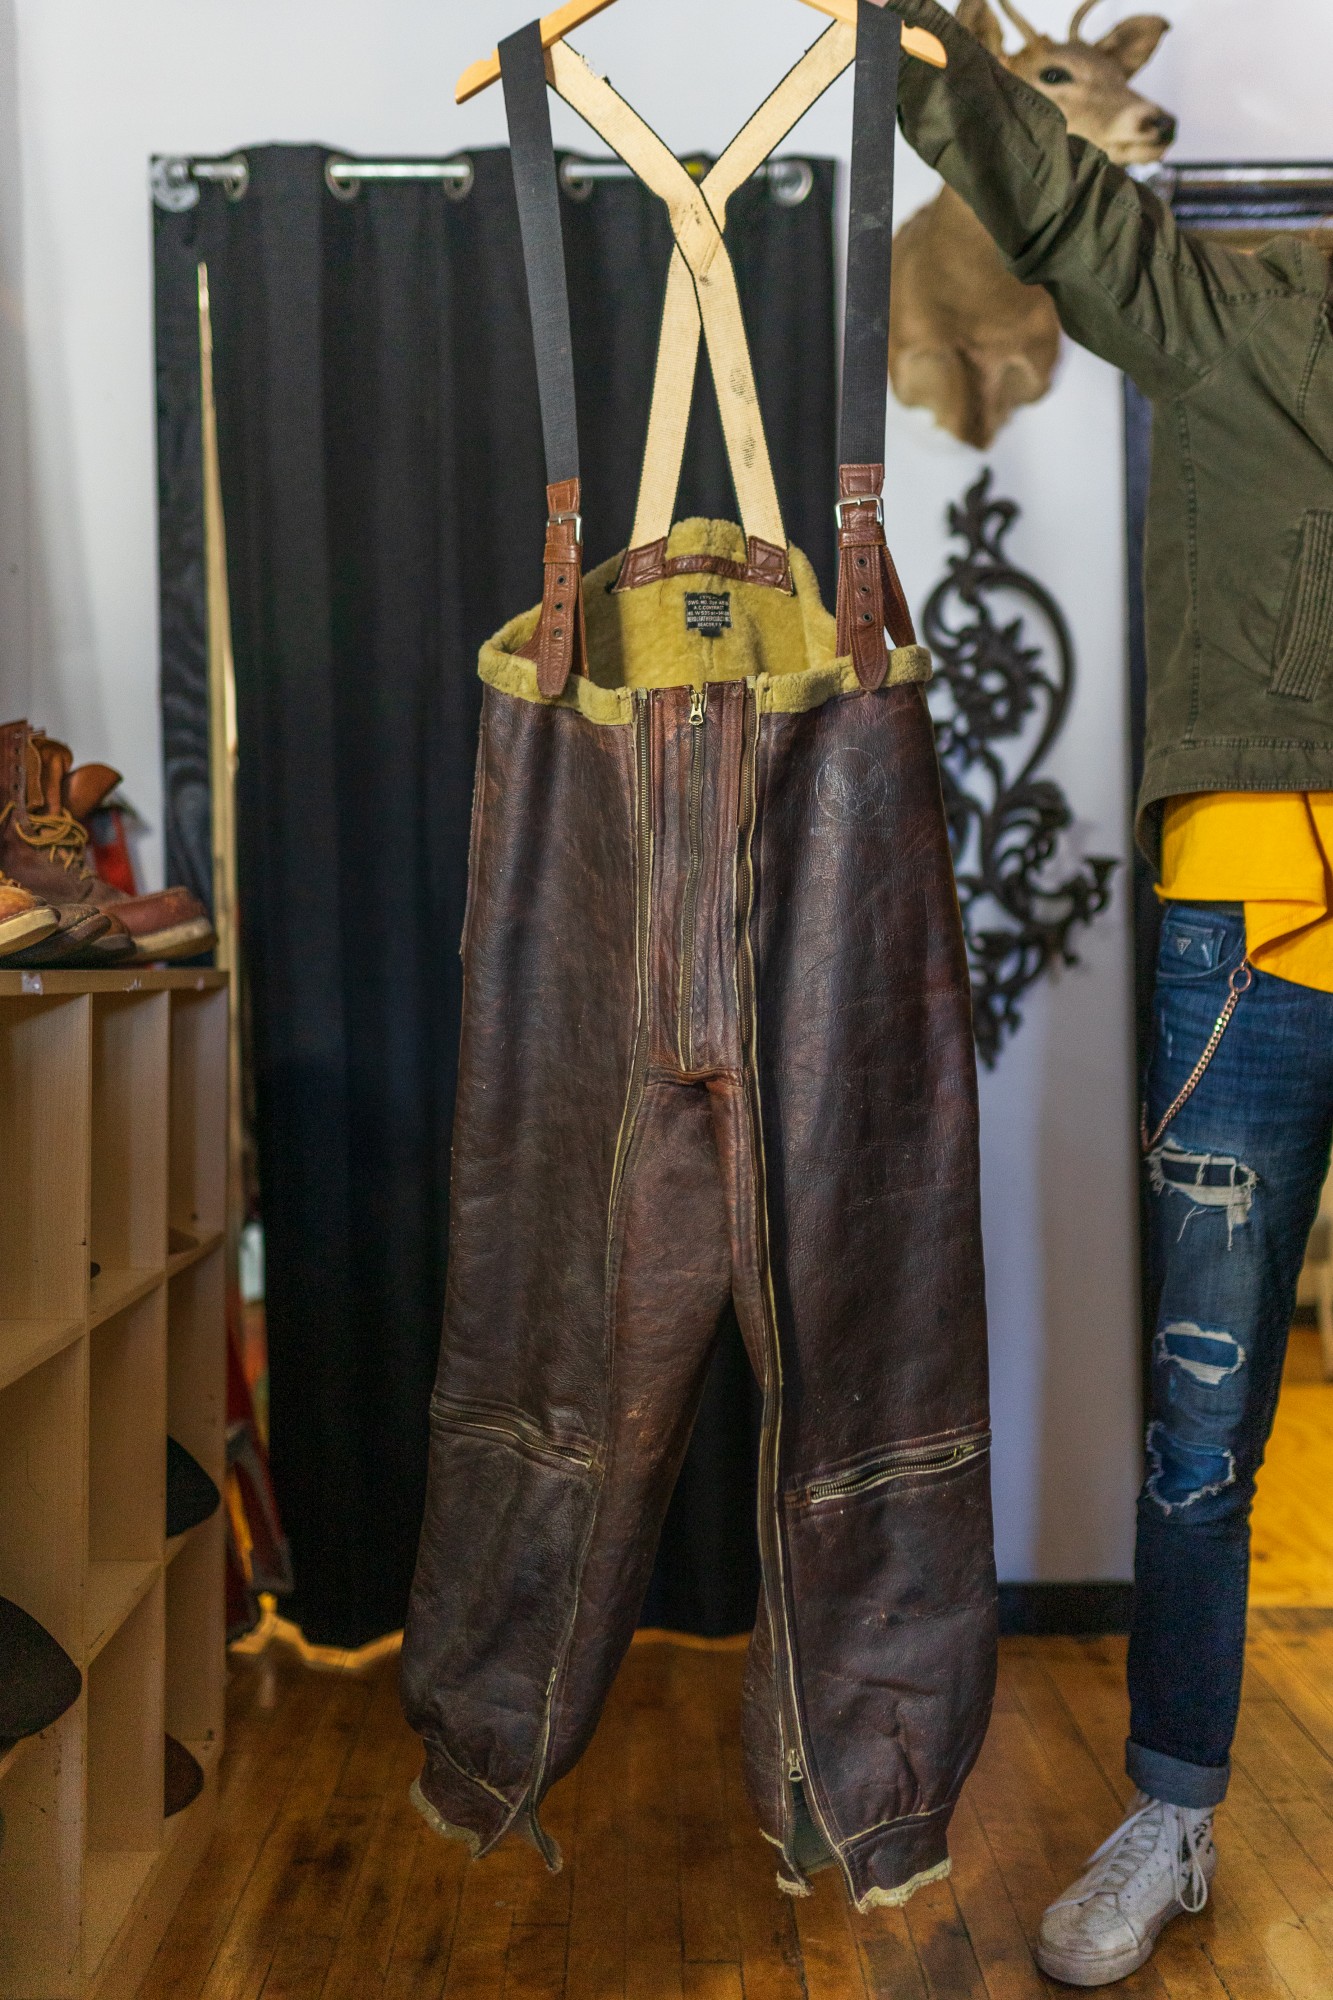 A pair of WWII Sheepskin flight pants, worn by U.S. Army Airforce pilots to combat extreme temperatures at altitude, at The Cat and The Cobra thrift and consignment store on Friday, Feb 29.